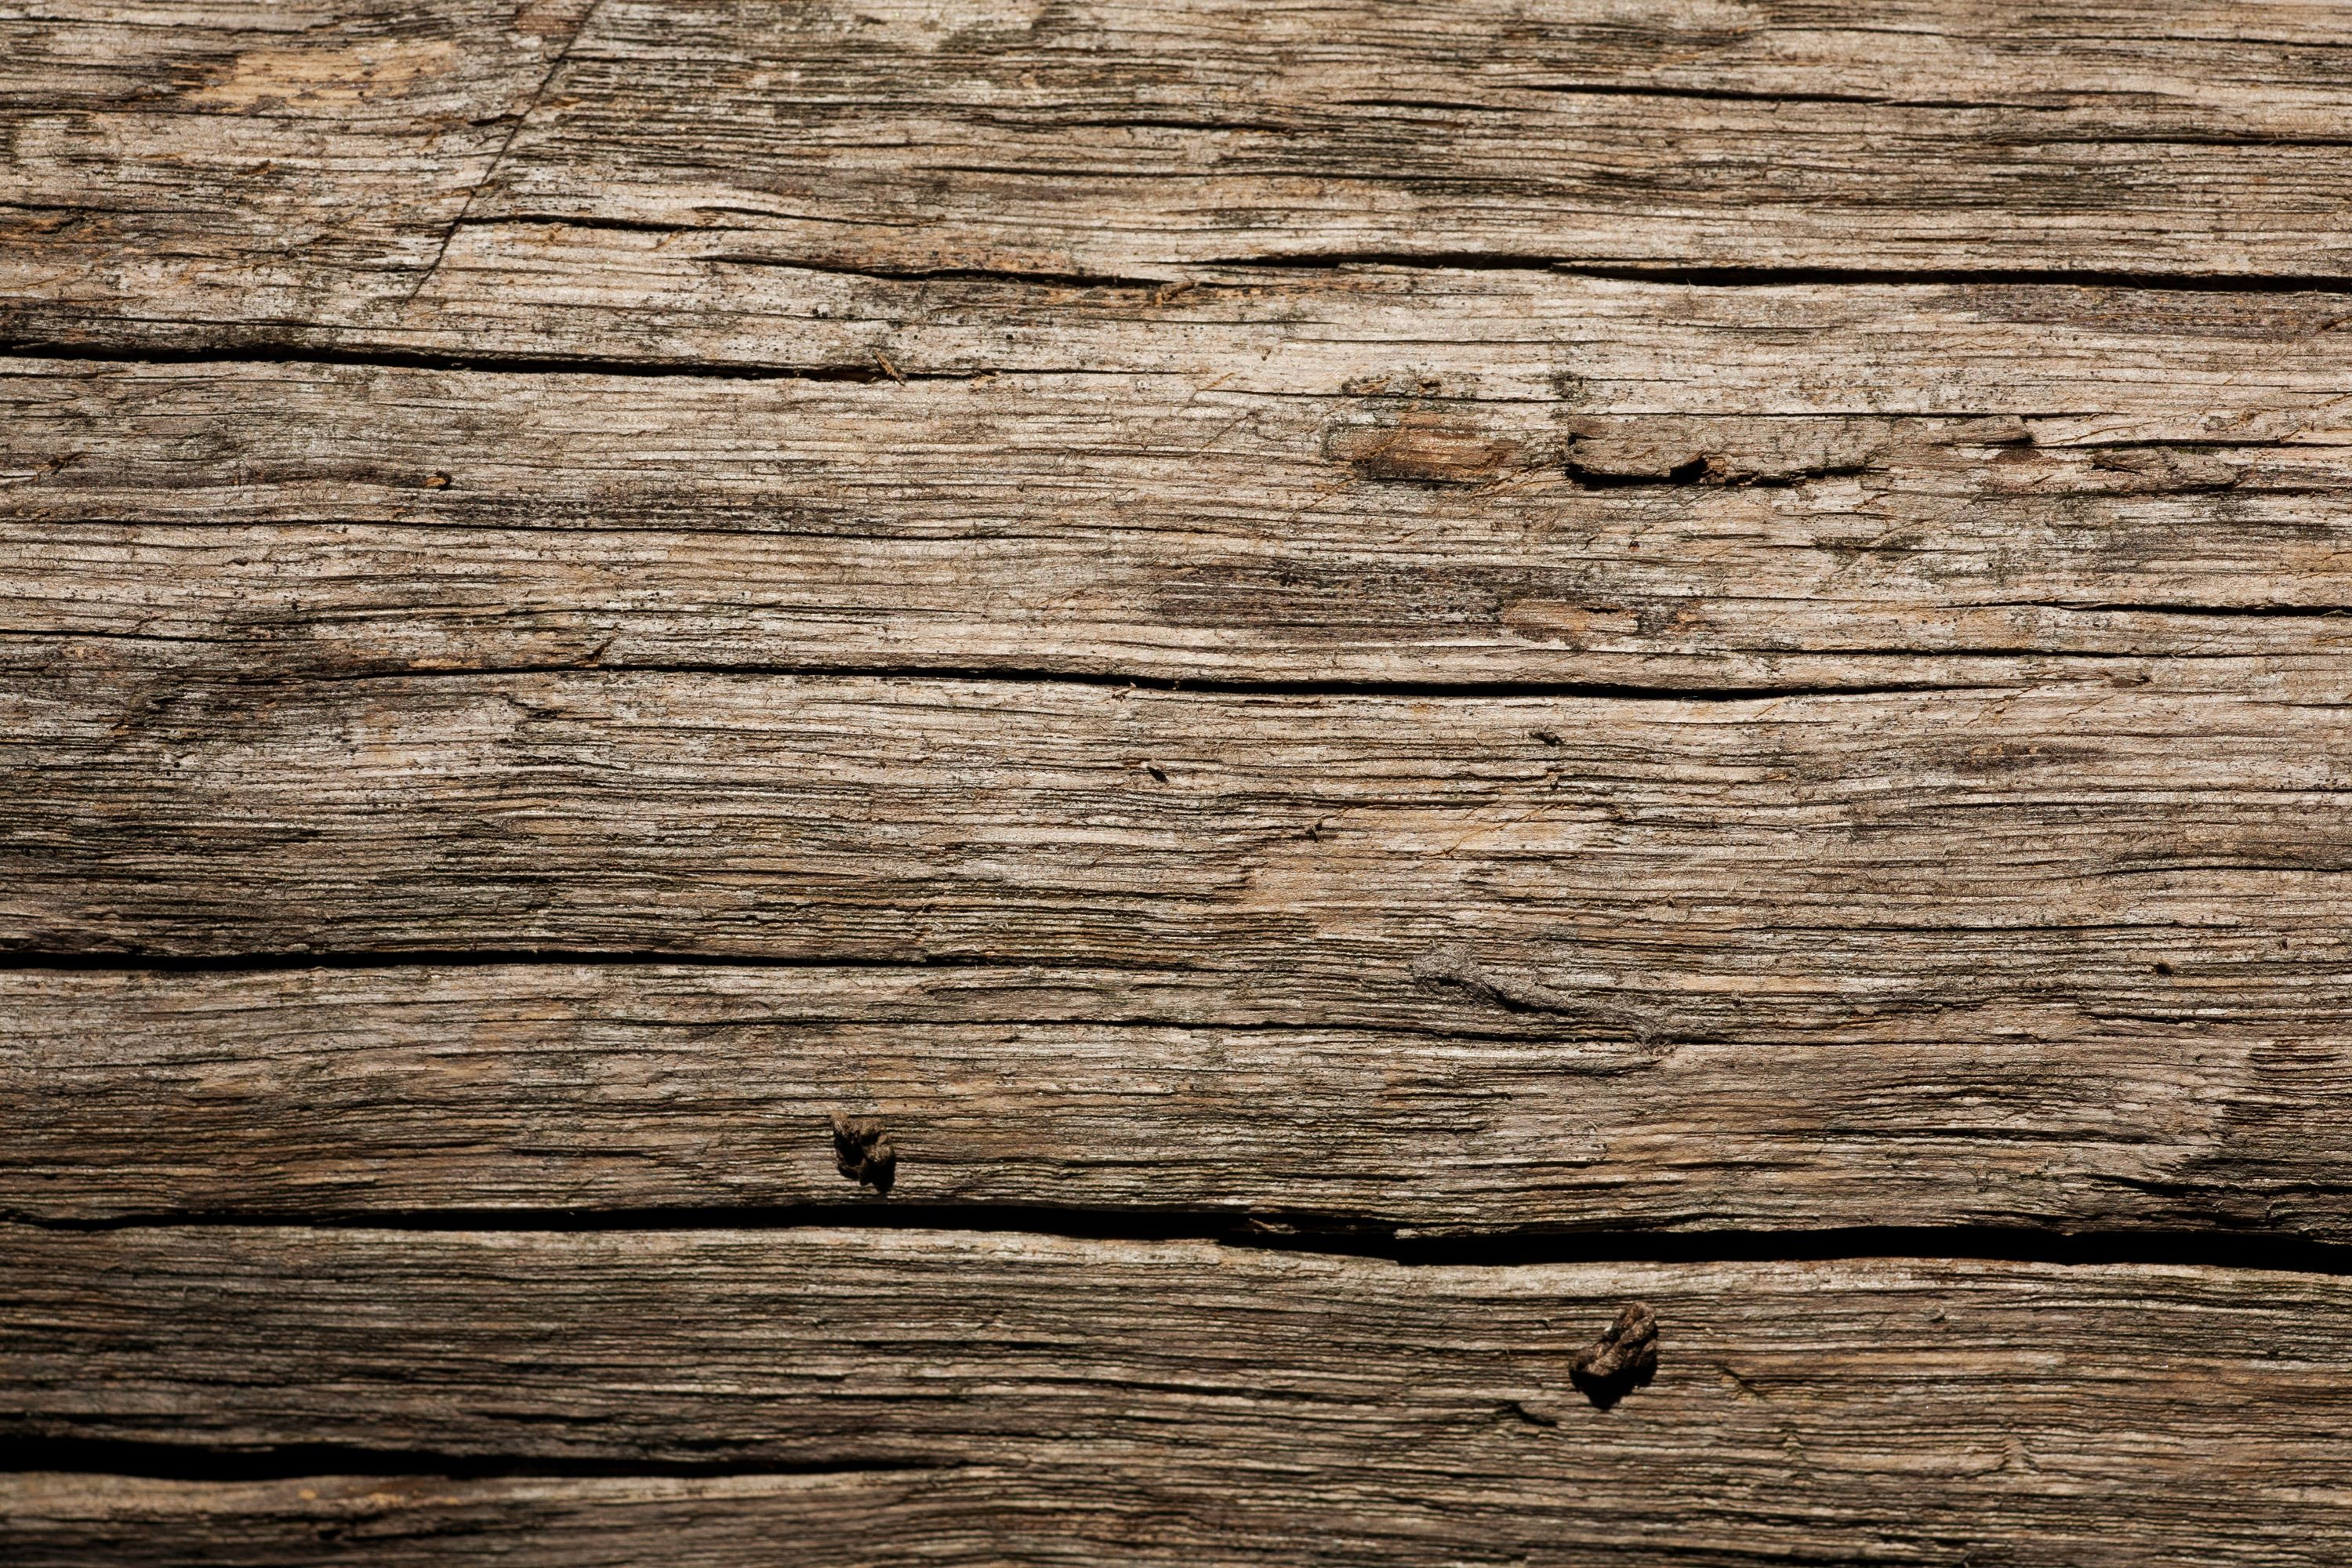 3000x2000 Wood Texture Wallpaper for Walls Best Of Old Wooden Boards Texture  Background Wood